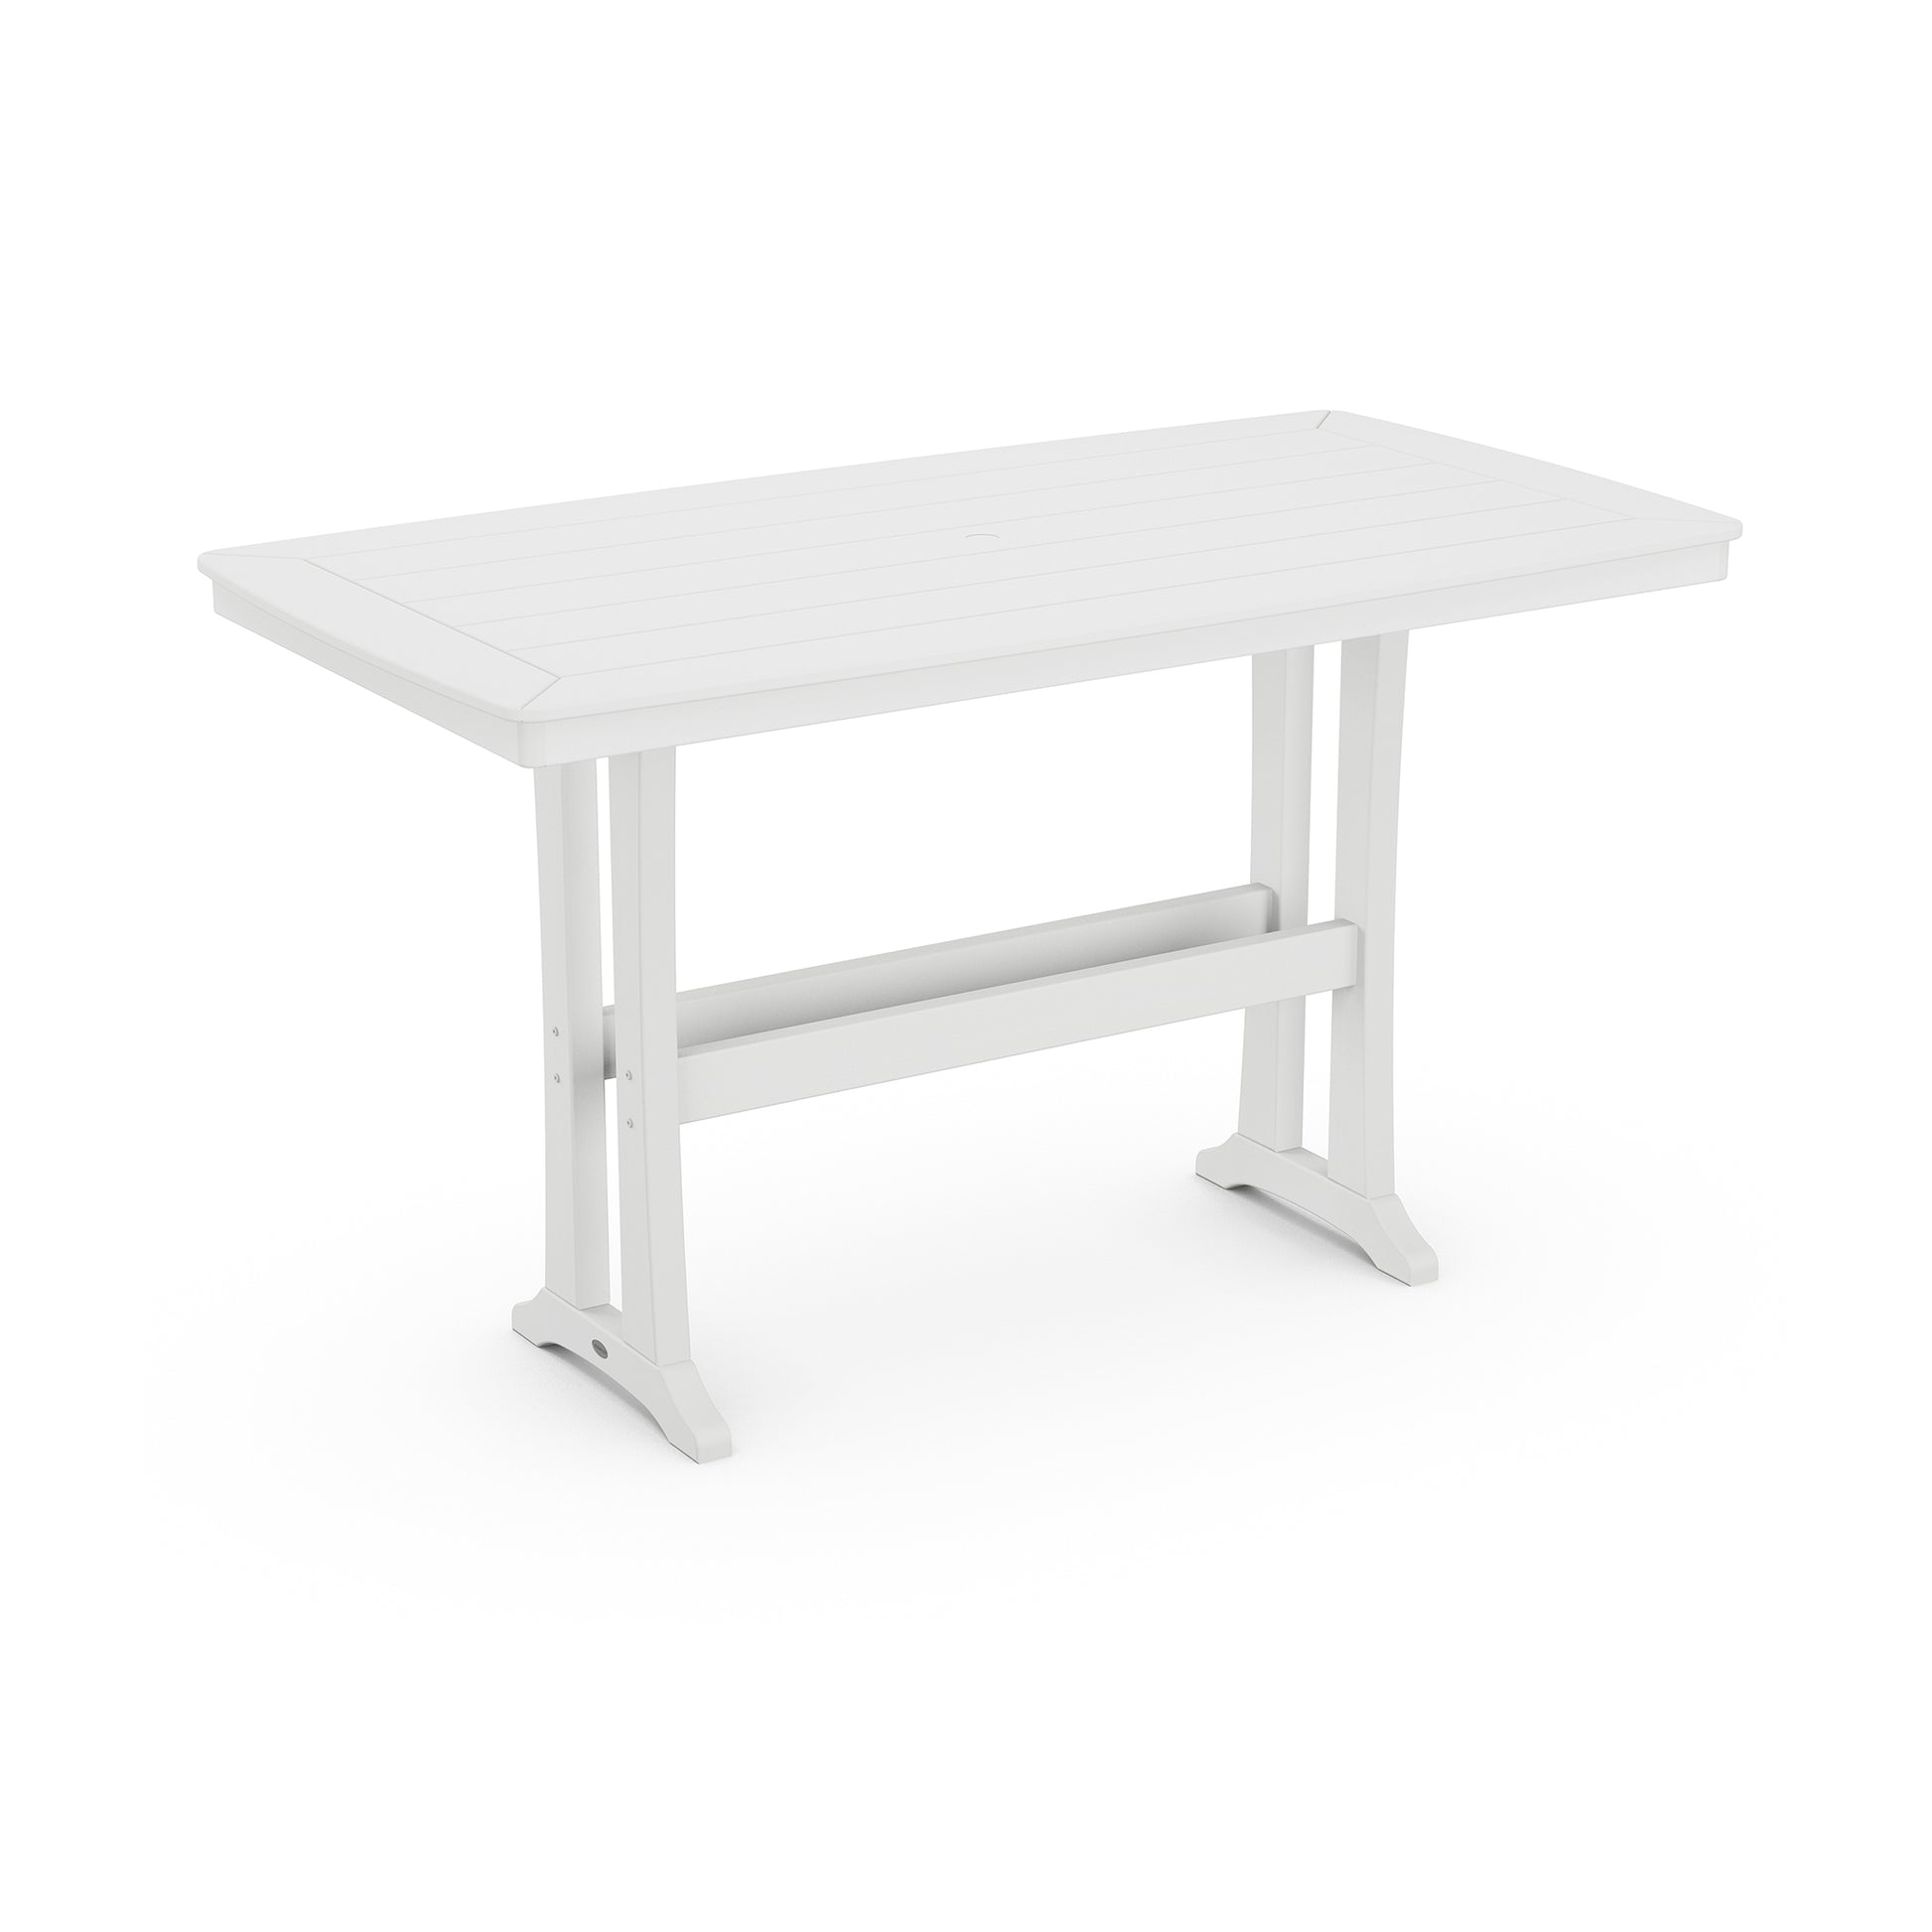 A simplistic white POLYWOOD Nautical Trestle 38" x 73" Bar Table crafted with eco-friendly POLYWOOD® lumber, featuring an adjustable height mechanism, set on a solid white background. The desk includes a horizontal footrest and stable base.